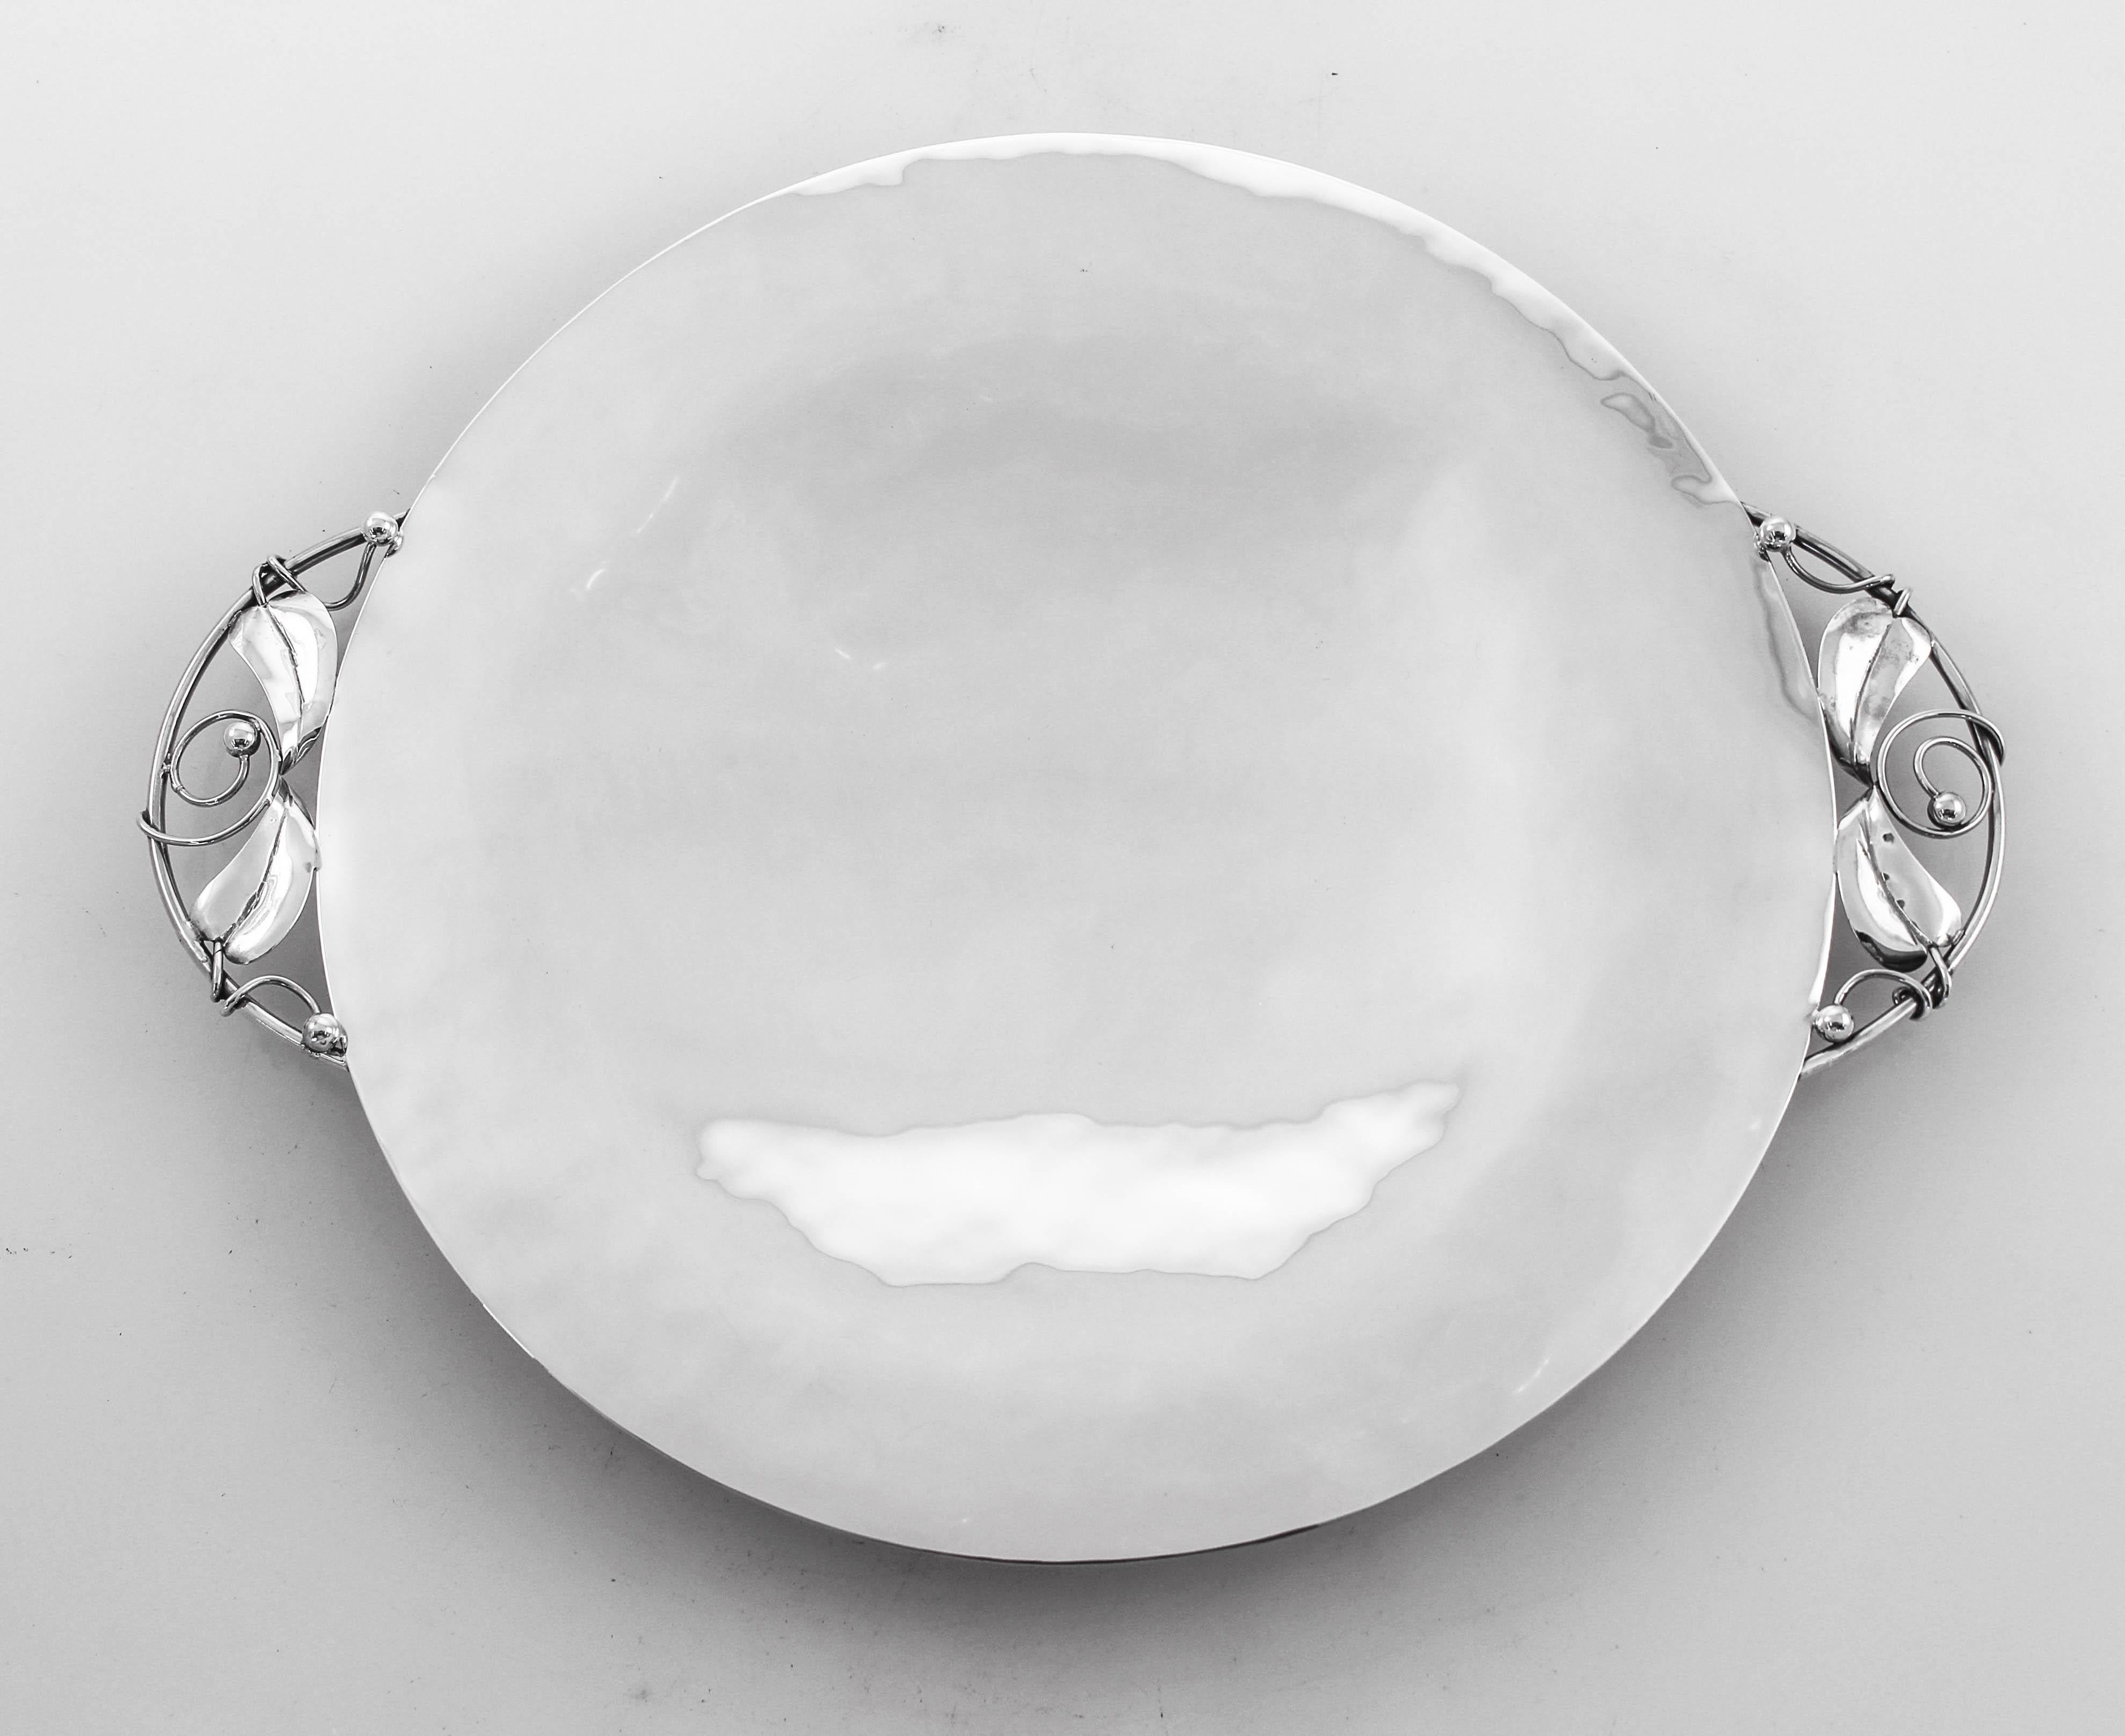 We proudly offer the sterling silver Arts & Crafts dish by Wheelock of Newport, Rhode Island. It is handmade and has a silversmith feel to it; you can tell it was handmade and not mass produced. It stands on four ball-feet and has handles on each